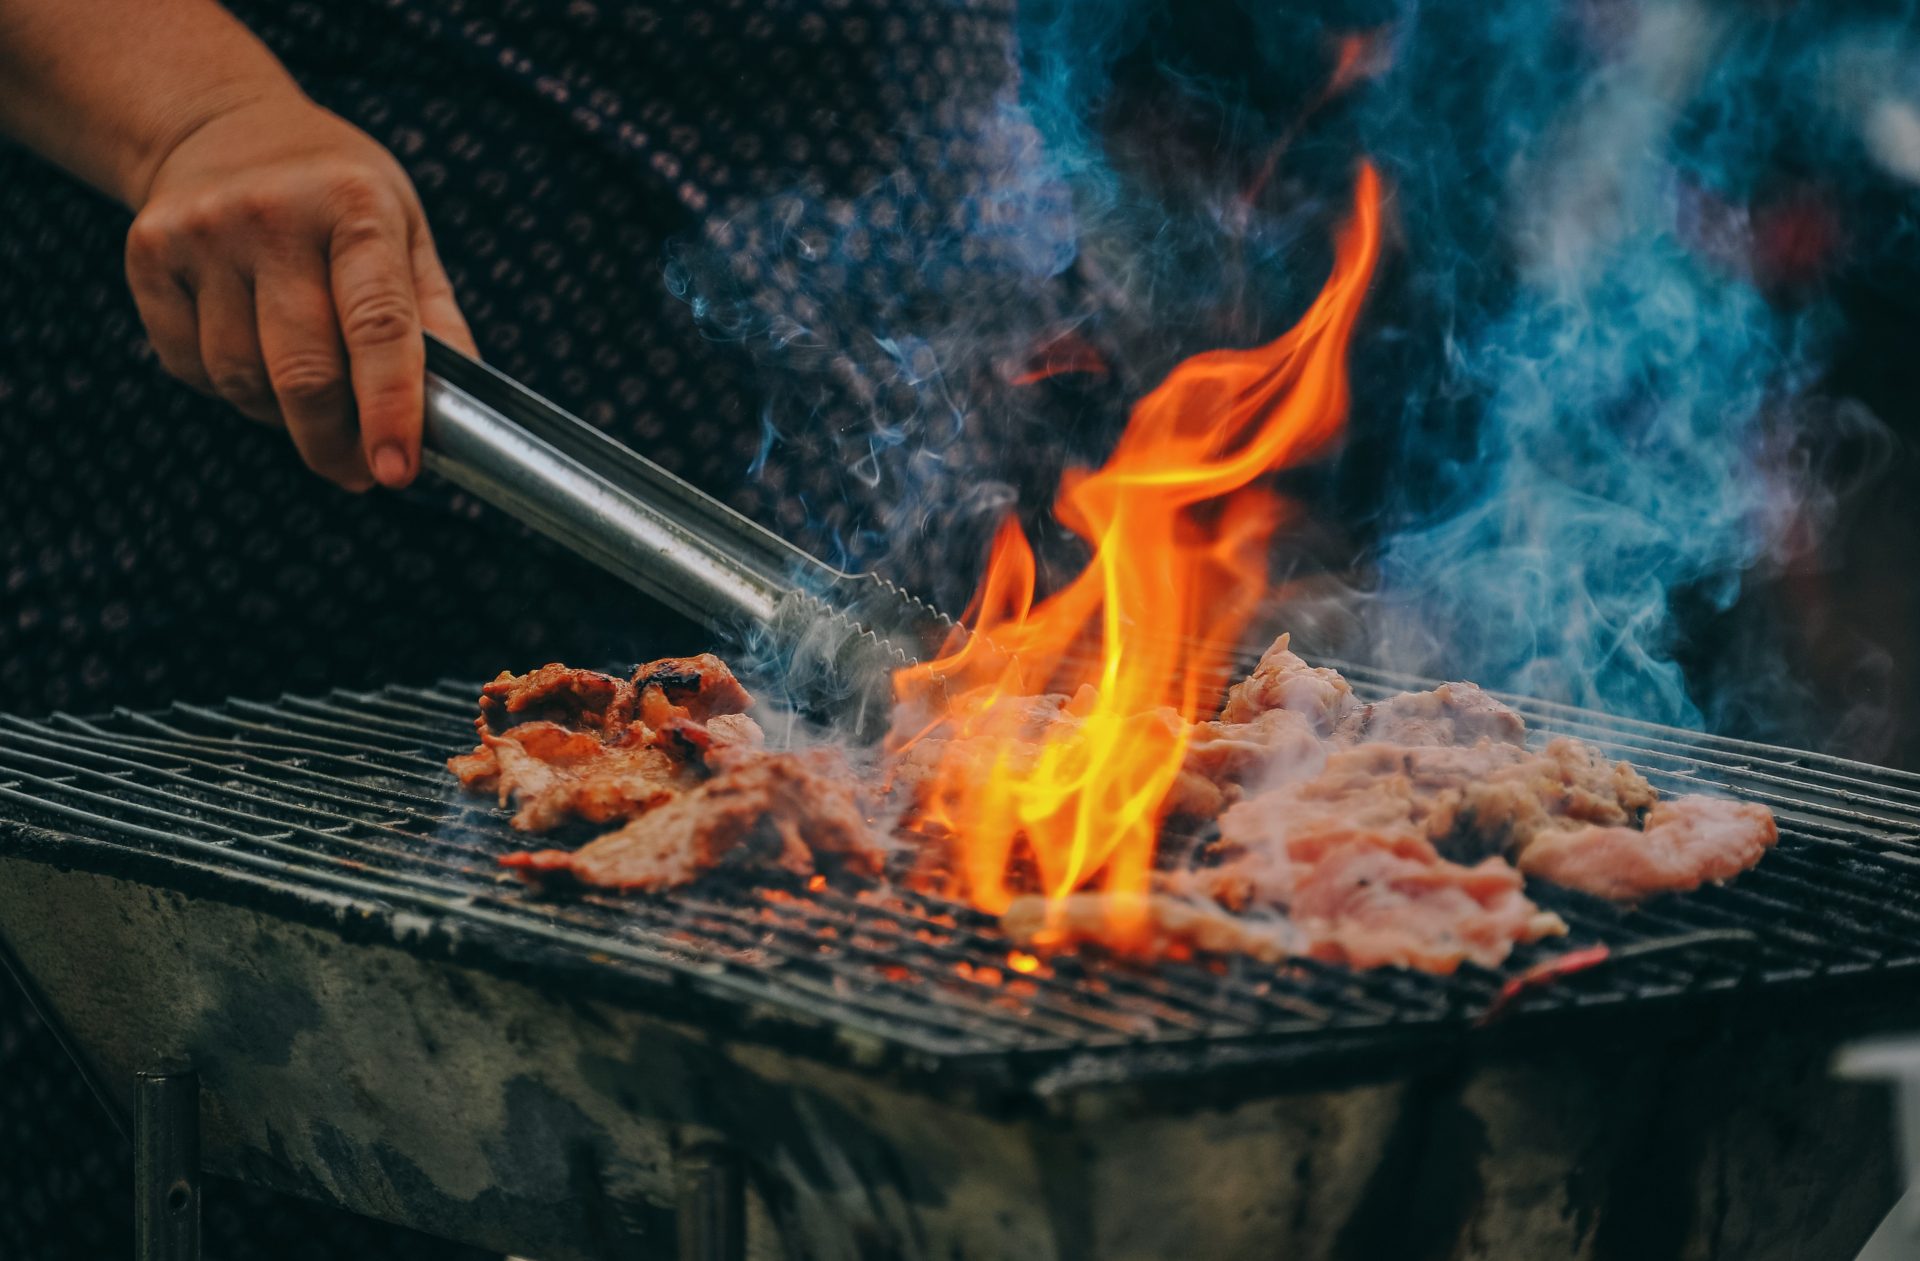 Finding the best BBQ meat hampers for your event